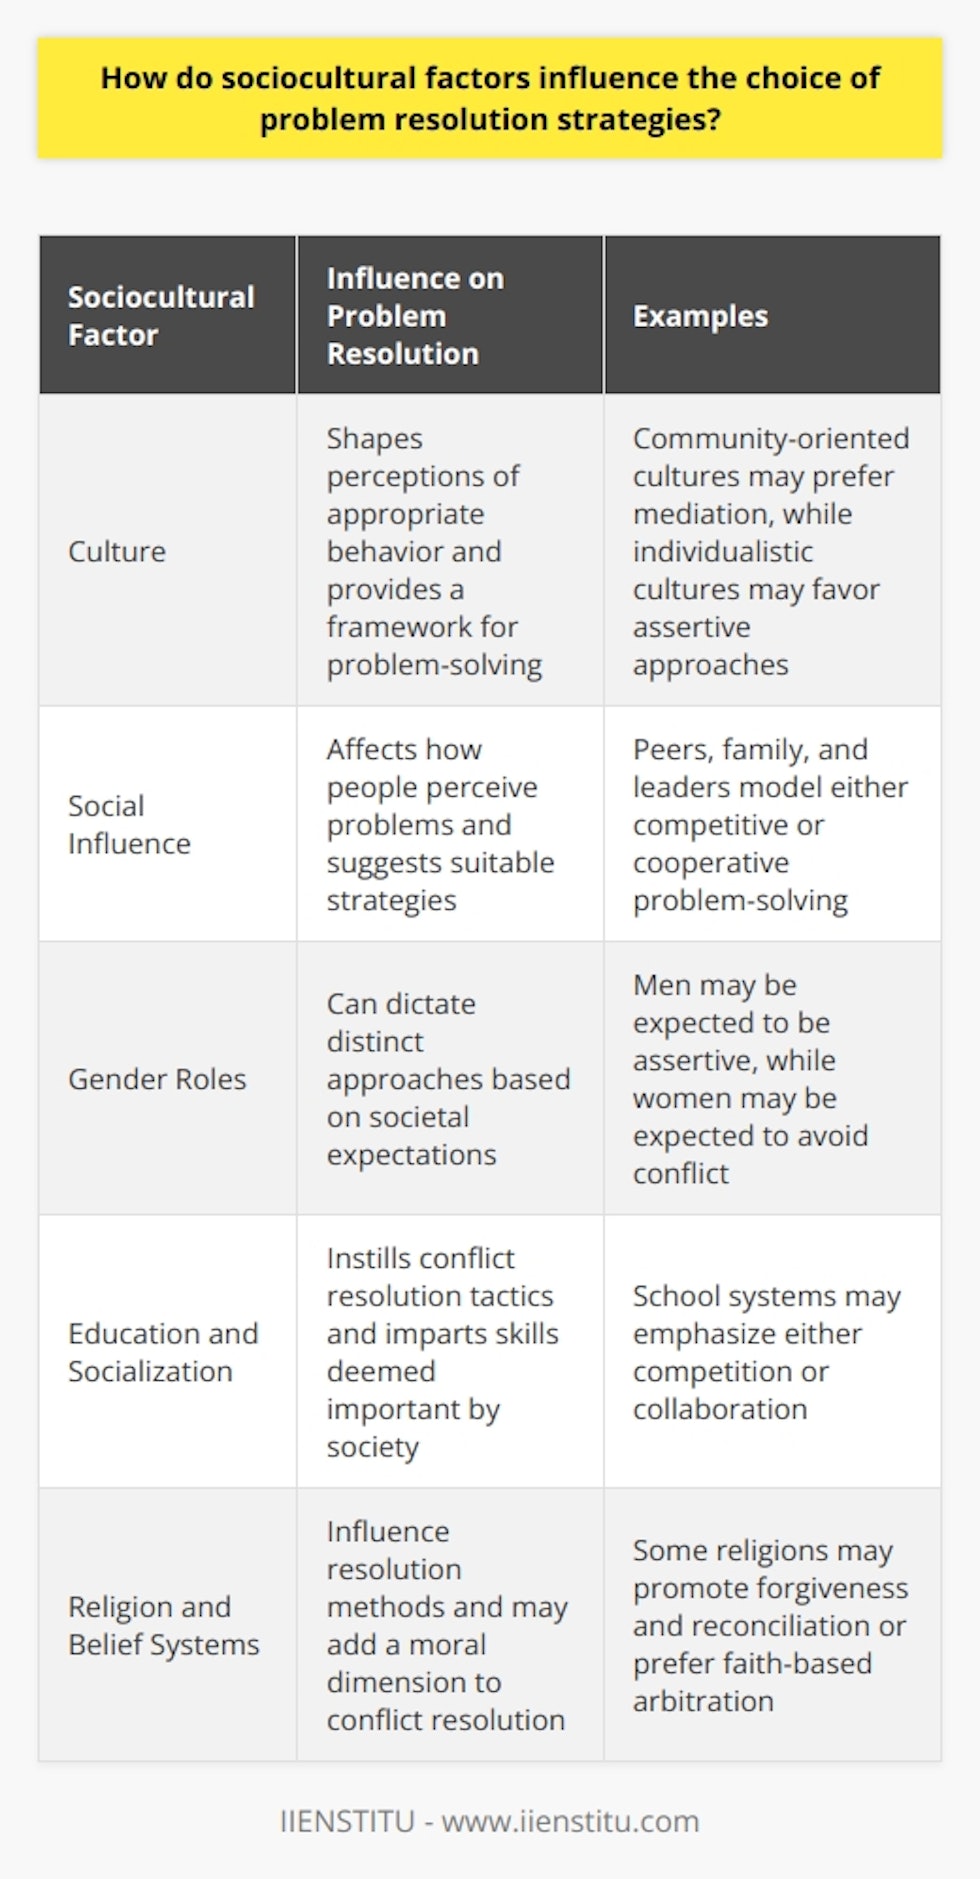 Sociocultural Factors and Problem Resolution Understanding culturally driven decision-making is complex. Societies differ widely. Individuals within them thus adhere to distinct norms. These norms often guide conflict resolution strategies. The Role of Culture Culture shapes perceptions of appropriate behavior. It provides a framework for problem-solving. Cultural protocols determine acceptable responses to conflicts. For example, some cultures value community harmony. Such values may promote  mediation  over confrontation. Meanwhile, individualistic cultures might stress personal rights. These societies often favor direct and assertive approaches. Egalitarian cultures might encourage collaborative strategies. Hierarchical societies might defer to authority figures. Social Influence Social influence is significant. It affects how people perceive problems. Peers, family, and leaders suggest suitable strategies. They model either competitive or cooperative problem-solving. Sociocultural norms dictate which influences are most potent. They also shape the cost of deviating from prescribed behavior. Conflict Resolution in Context Different contexts yield different strategies. Familial disputes might use conciliatory tactics. Workplace conflicts could necessitate formal mediation. Sociocultural context influences the resolution method chosen.  Gender Roles Gender roles can dictate distinct approaches. Traditionally, societies expect men to be assertive. Conversely, women might be expected to avoid conflict. Such roles guide gender-specific resolution strategies. These expectations can hinder effective problem solving across genders. Education and Socialization Education instills conflict resolution tactics. School systems reflect the broader sociocultural values. They impart the skills deemed important by society. Children learn either competition or collaboration. The societys emphasis determines which skills are honed. Religion and Belief Systems Religious beliefs influence resolution methods. Religious tenets might promote forgiveness and reconciliation. In some religions, faith-based arbitration is preferred. These systems add a moral dimension to conflict resolution. Economic Factors Economic systems play a role. Capitalist societies might encourage competitive dispute resolution. Socially oriented economies might favor collective problem-solving. The economic framework often indicates the preferred approach. Legal Systems Legal systems embody sociocultural values. They often suggest formal processes. These processes can either be adversarial or restorative. Societies with strong legal traditions might favor structured resolution. Conclusion Sociocultural factors profoundly influence problem resolution. Understanding these influencers is vital. It ensures more culturally sensitive and effective approaches. Recognizing these nuances can lead to better outcomes in conflict resolution.